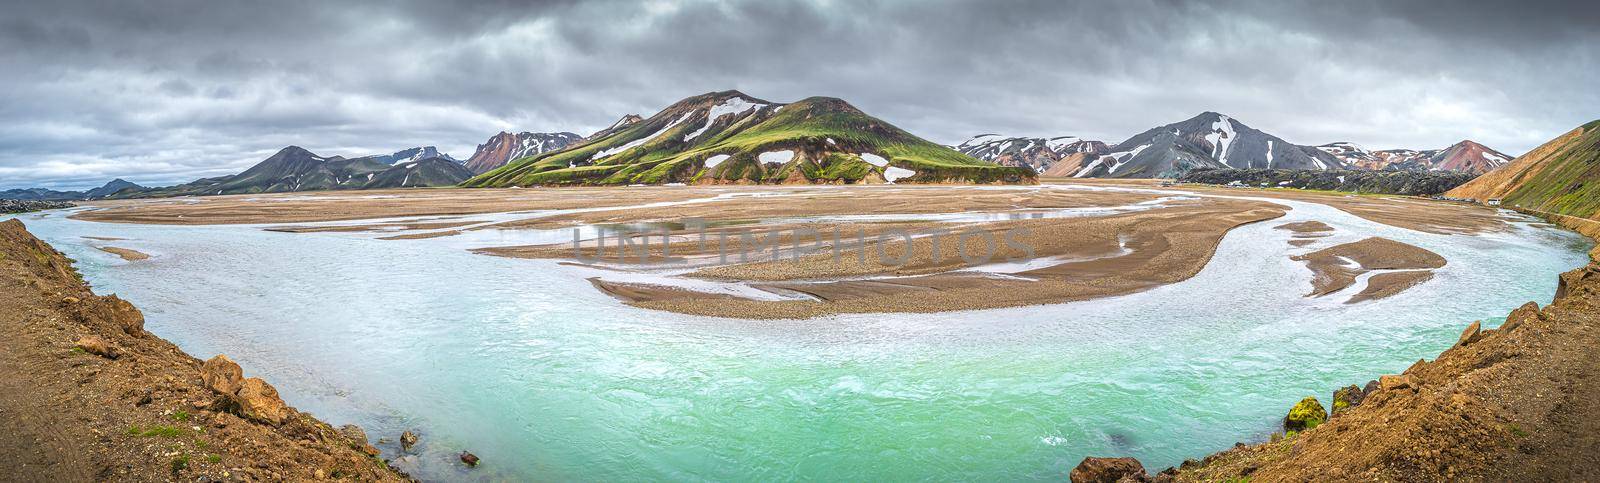 Panoramic view of colorful volcanic rainbow Landmannalaugar mountains, camping site and flooding with river in Iceland, summer